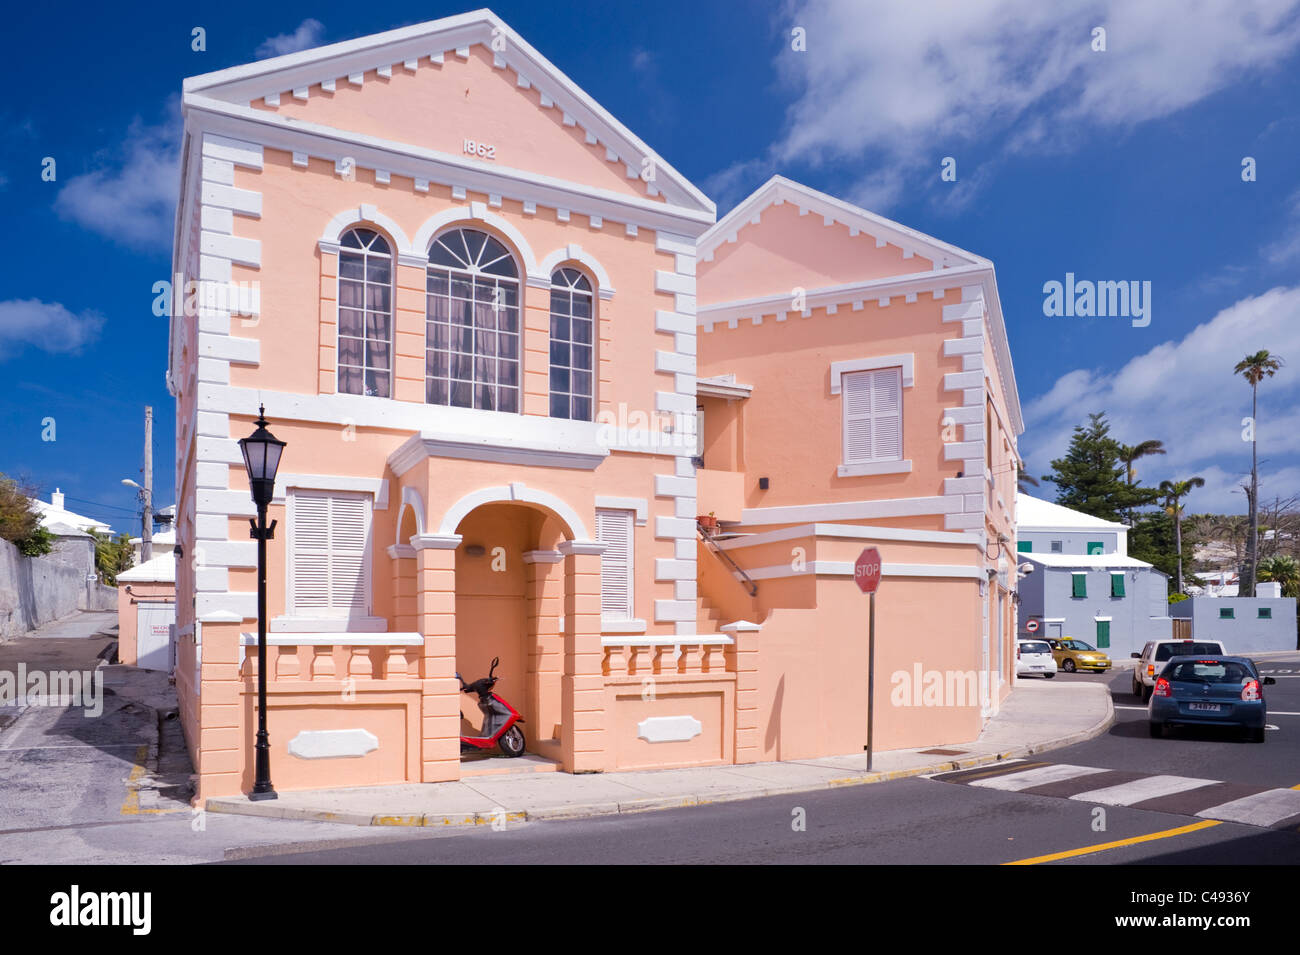 Pink house features in the historical architecture of St. George, Bermuda. Stock Photo